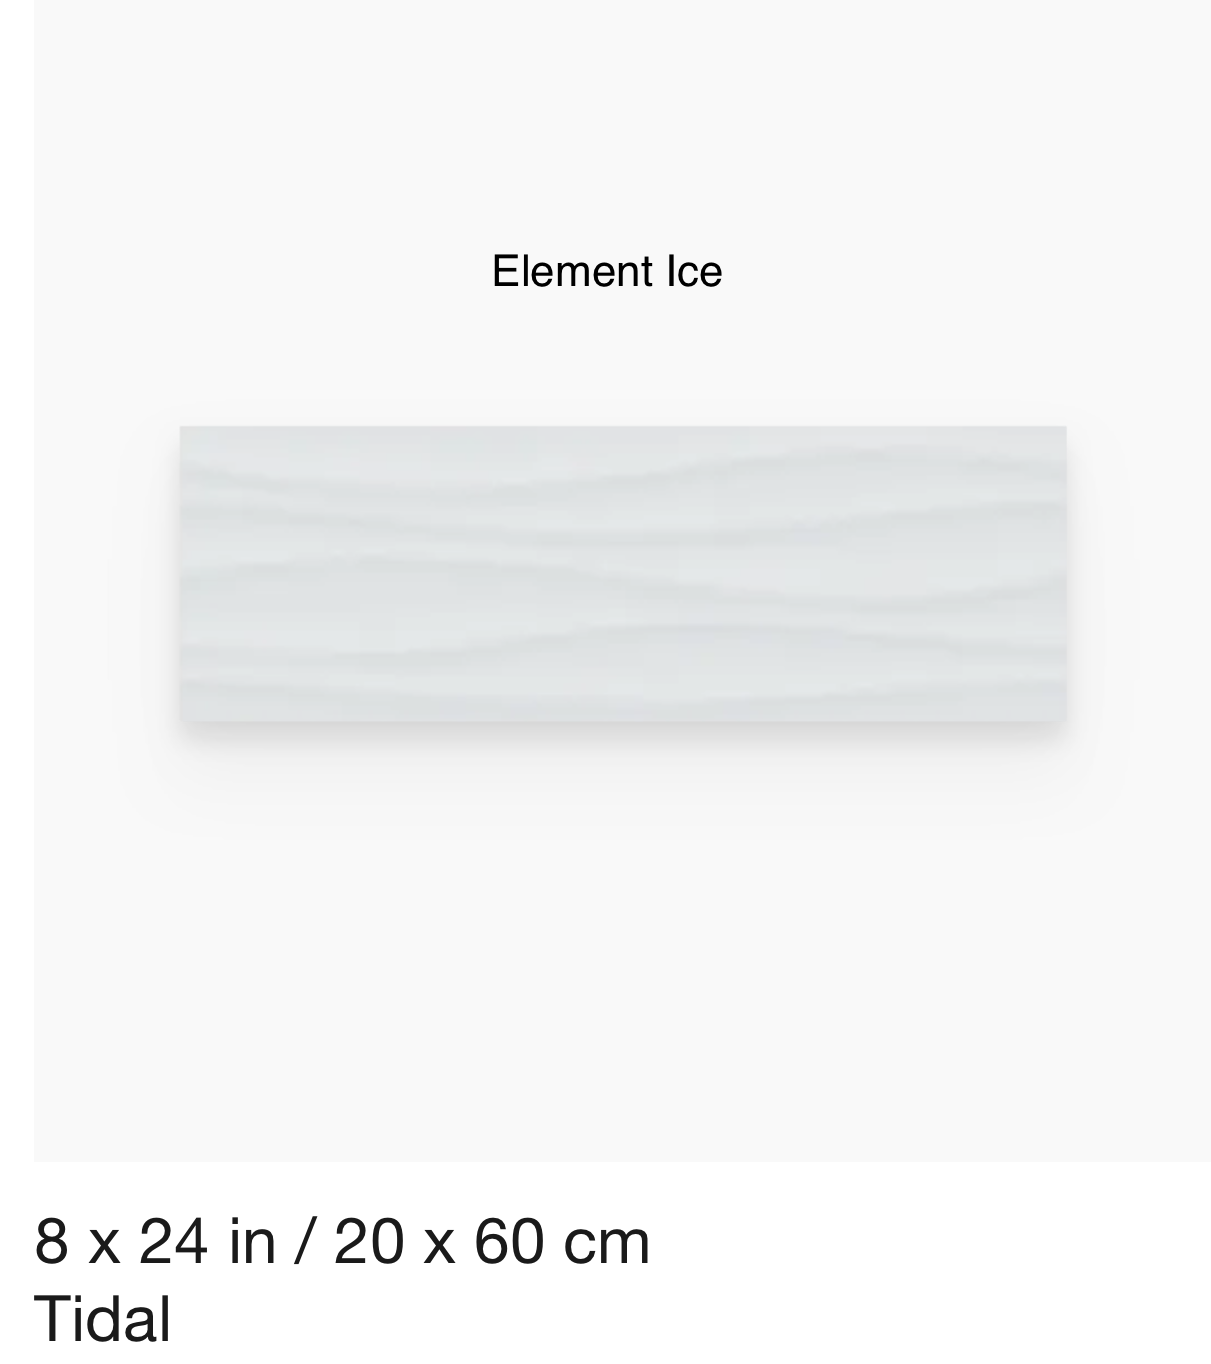 Element Glass Series 8x24 "Tidal" (Anatolia) available in three colors $16.14 SQFT